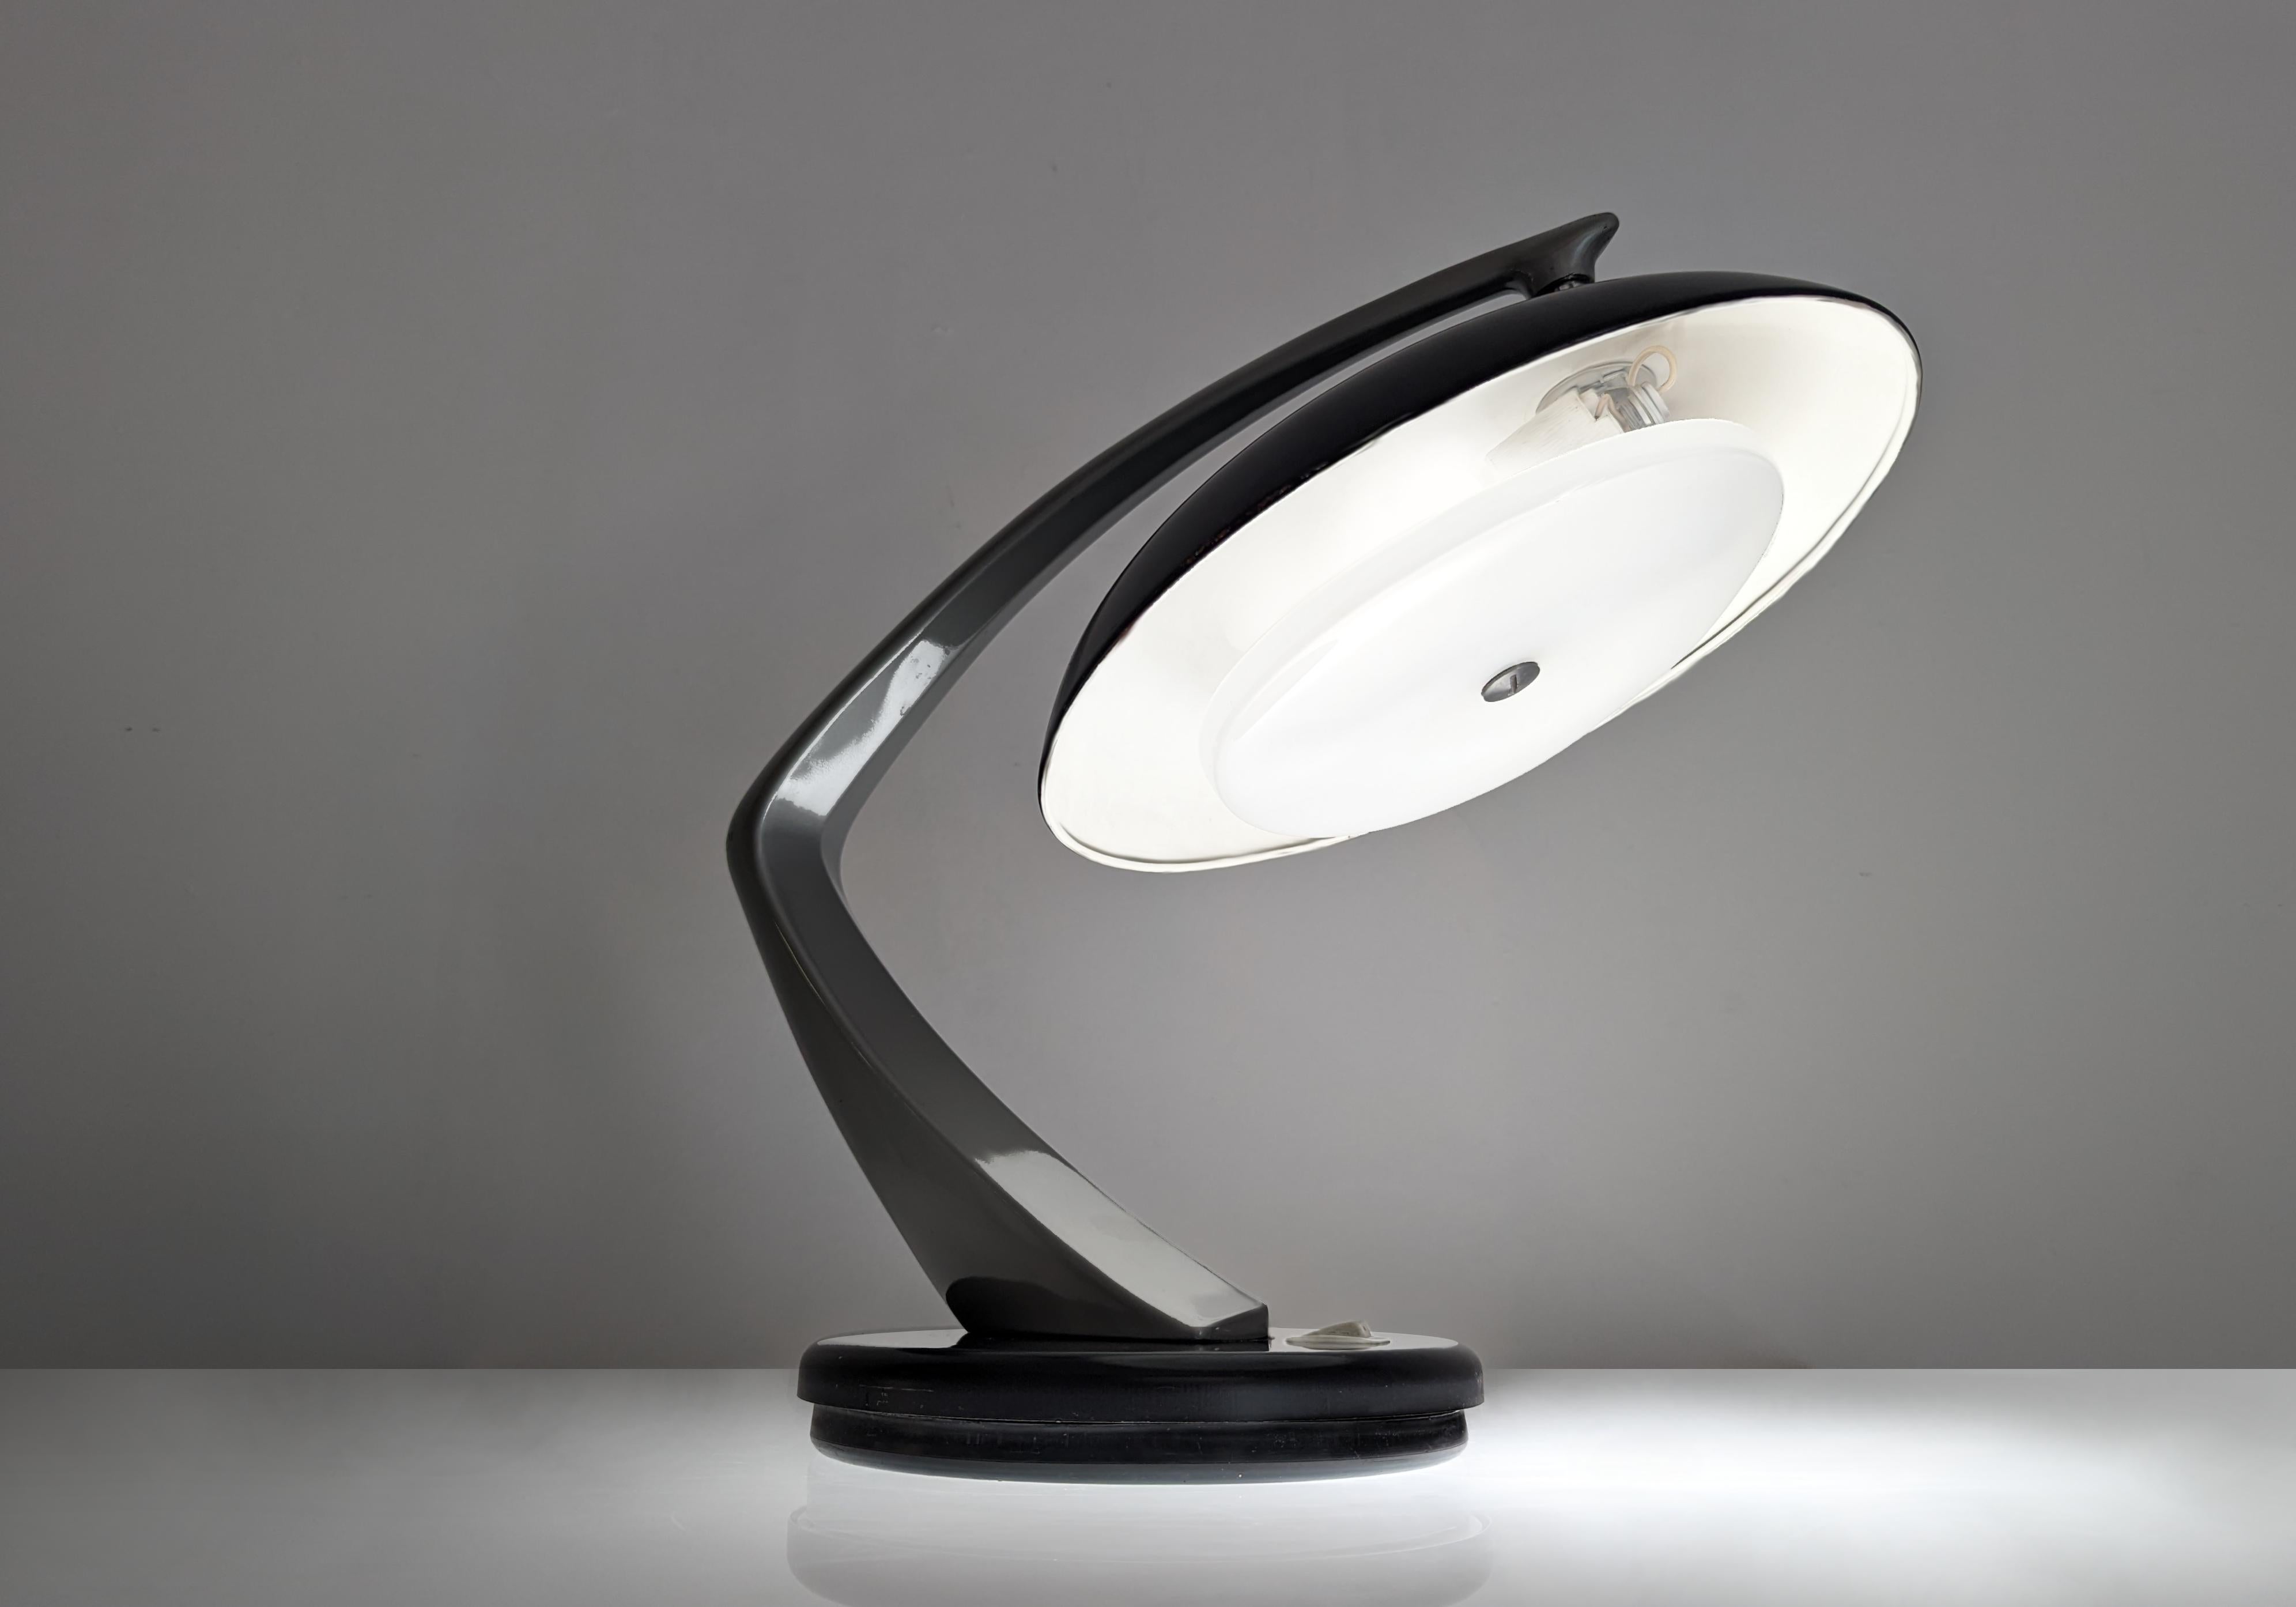 Fantastic Boomerang 64 lamp produced by FASE and designed by Luis Pérez de la Oliva and Pedro Martín García in 1964, elegant model in black and gray, with an adjustable swivel shade that allows us to play with different positions and lighting.